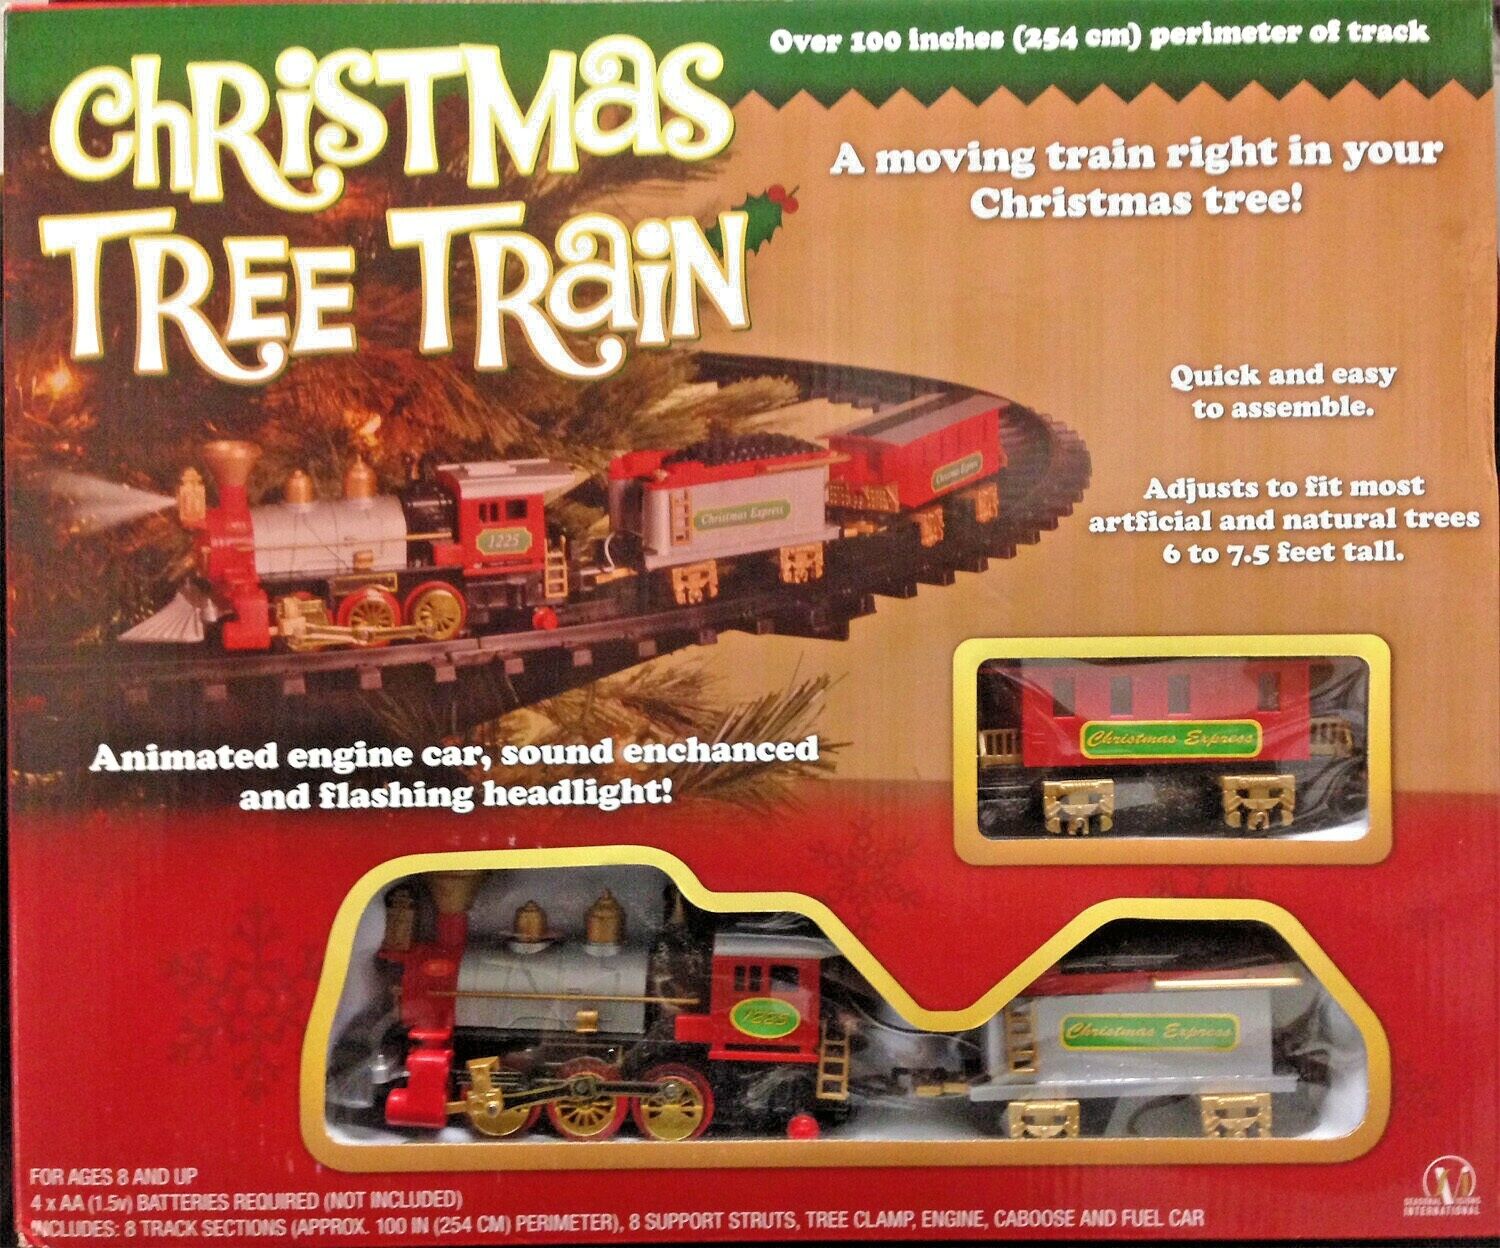 New Light Sounds ANIMATED CHRISTMAS TRAIN SET Holiday Decoration Mounts in Tree